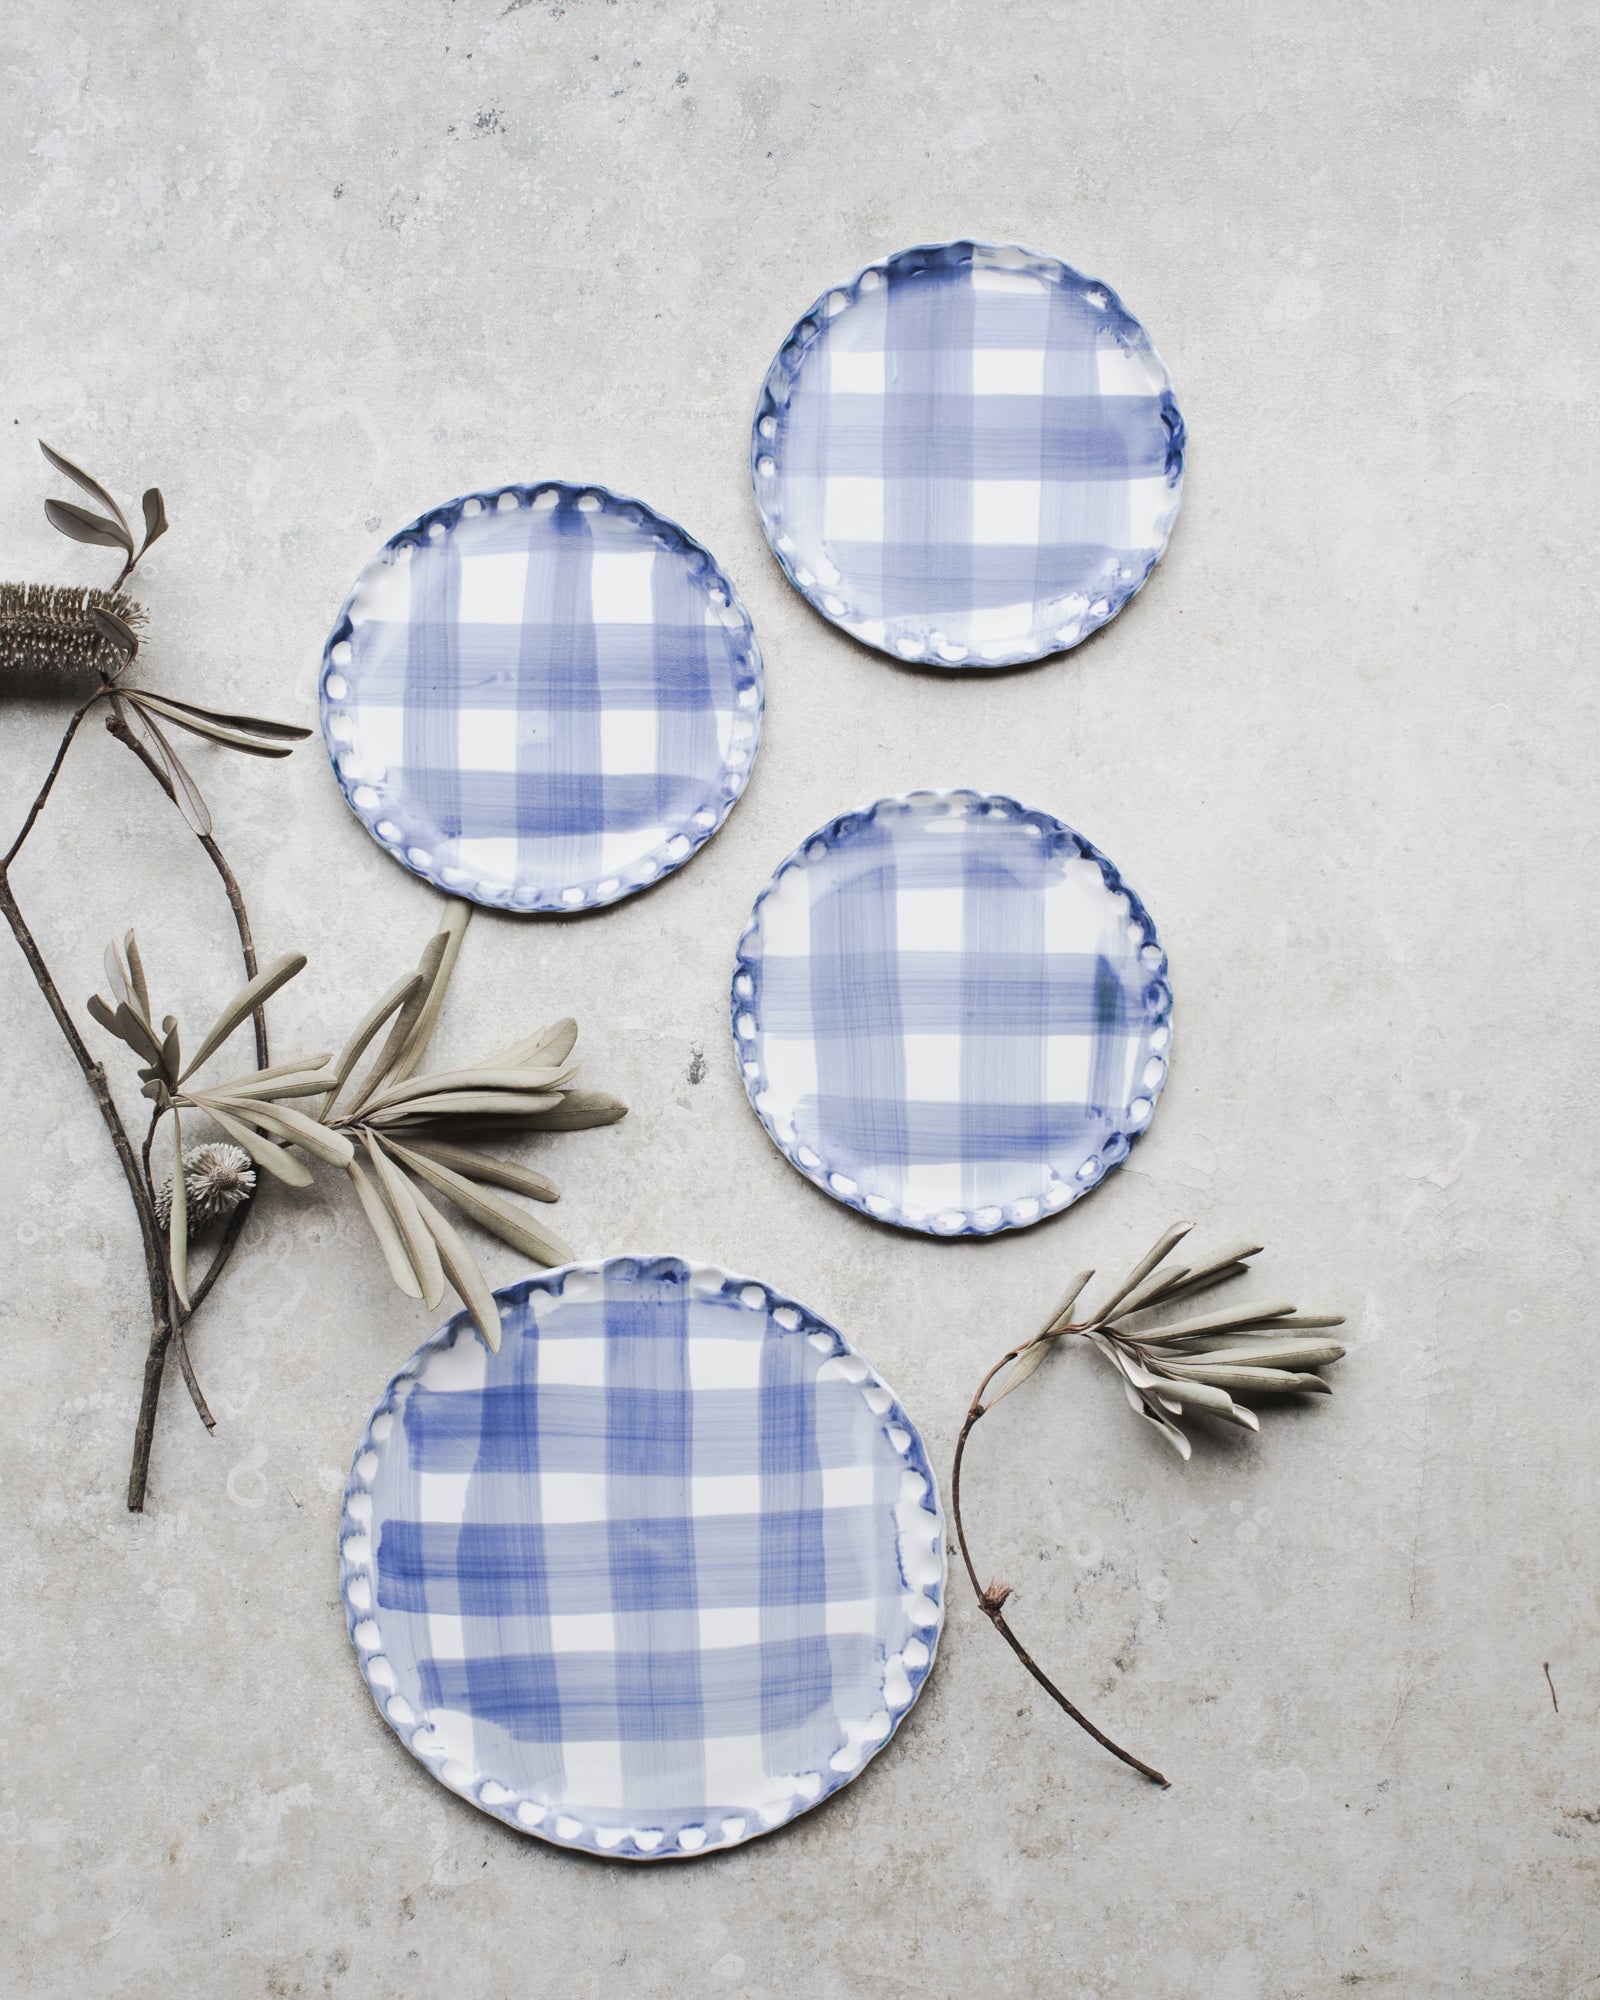 Blue and white tartan patterned scallop rim plates handmade by clay beehive